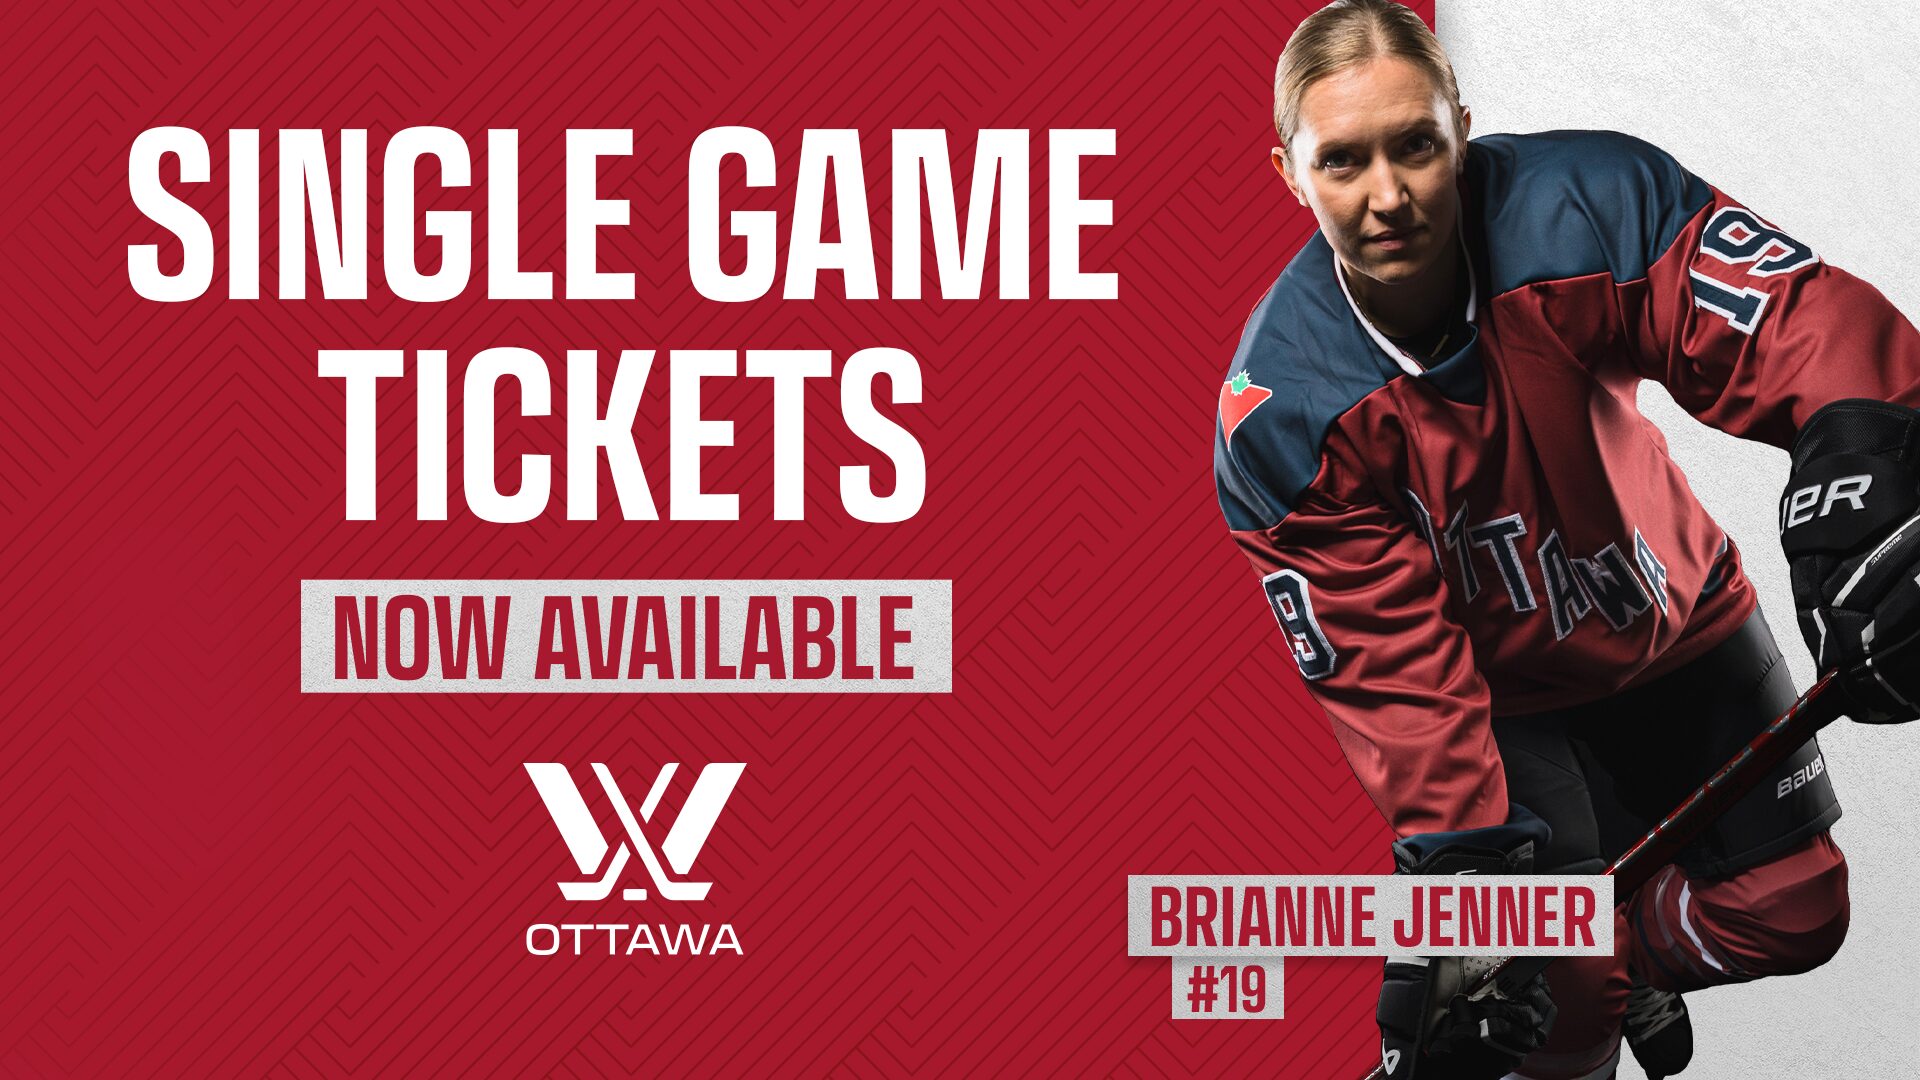 PWHL player Brianne Jenner